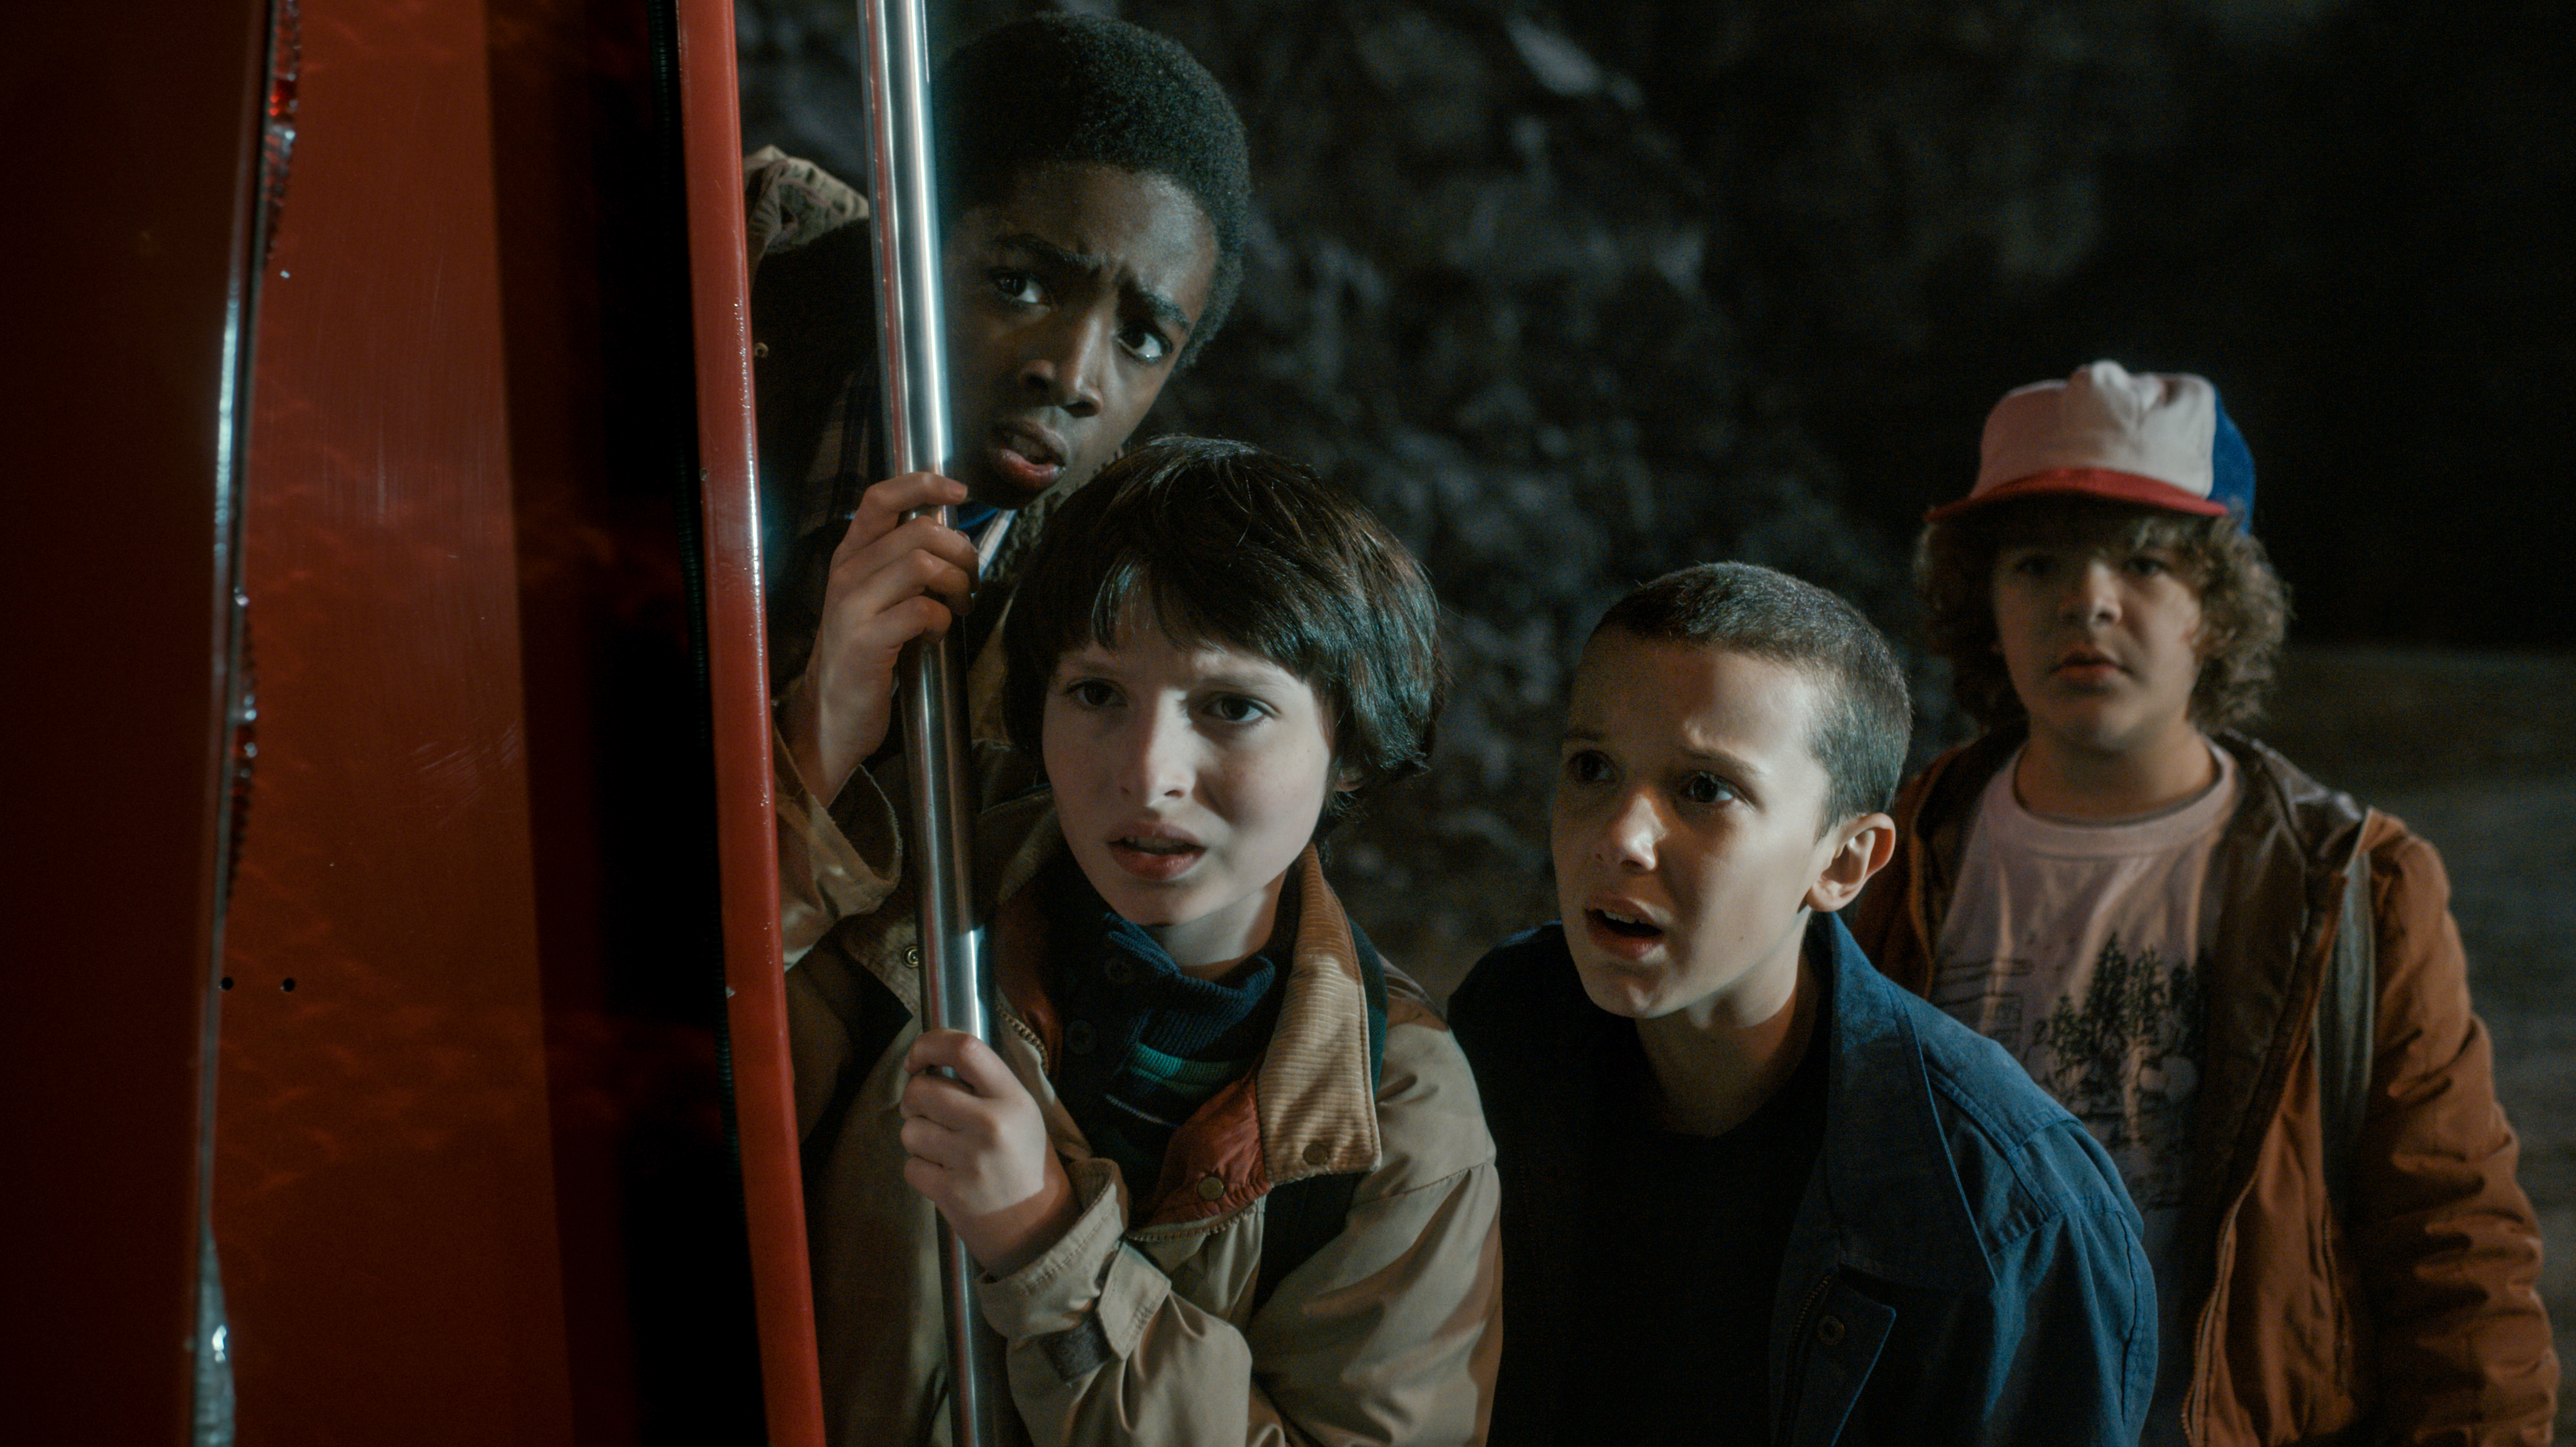 Yes Netflixs Stranger Things Will Be Available In 4k Modern